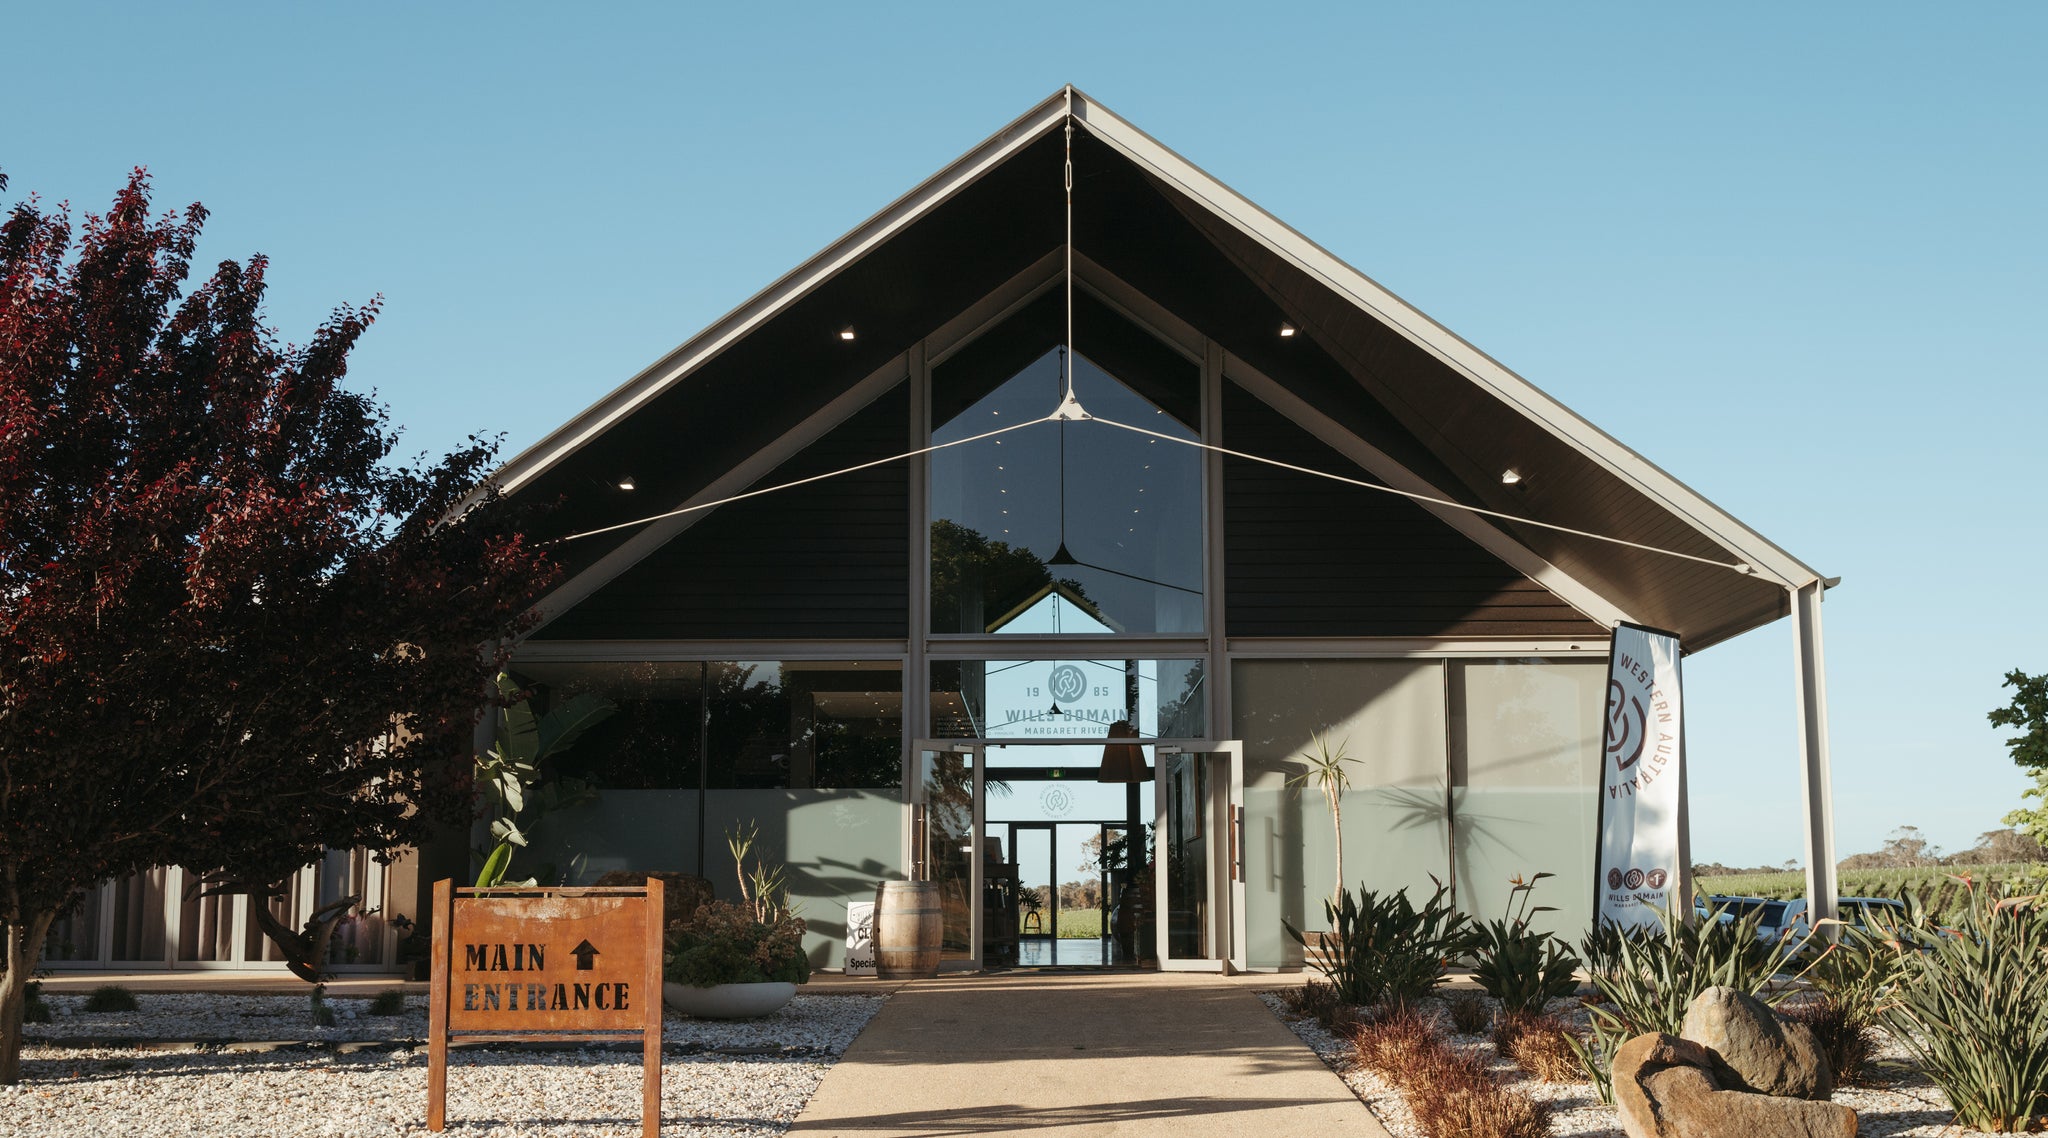 The entrance to Wills Domain Cellar Door, doorway to an extraordinary Margarets River wine tasting experience featuring paired snack platters for foodies.